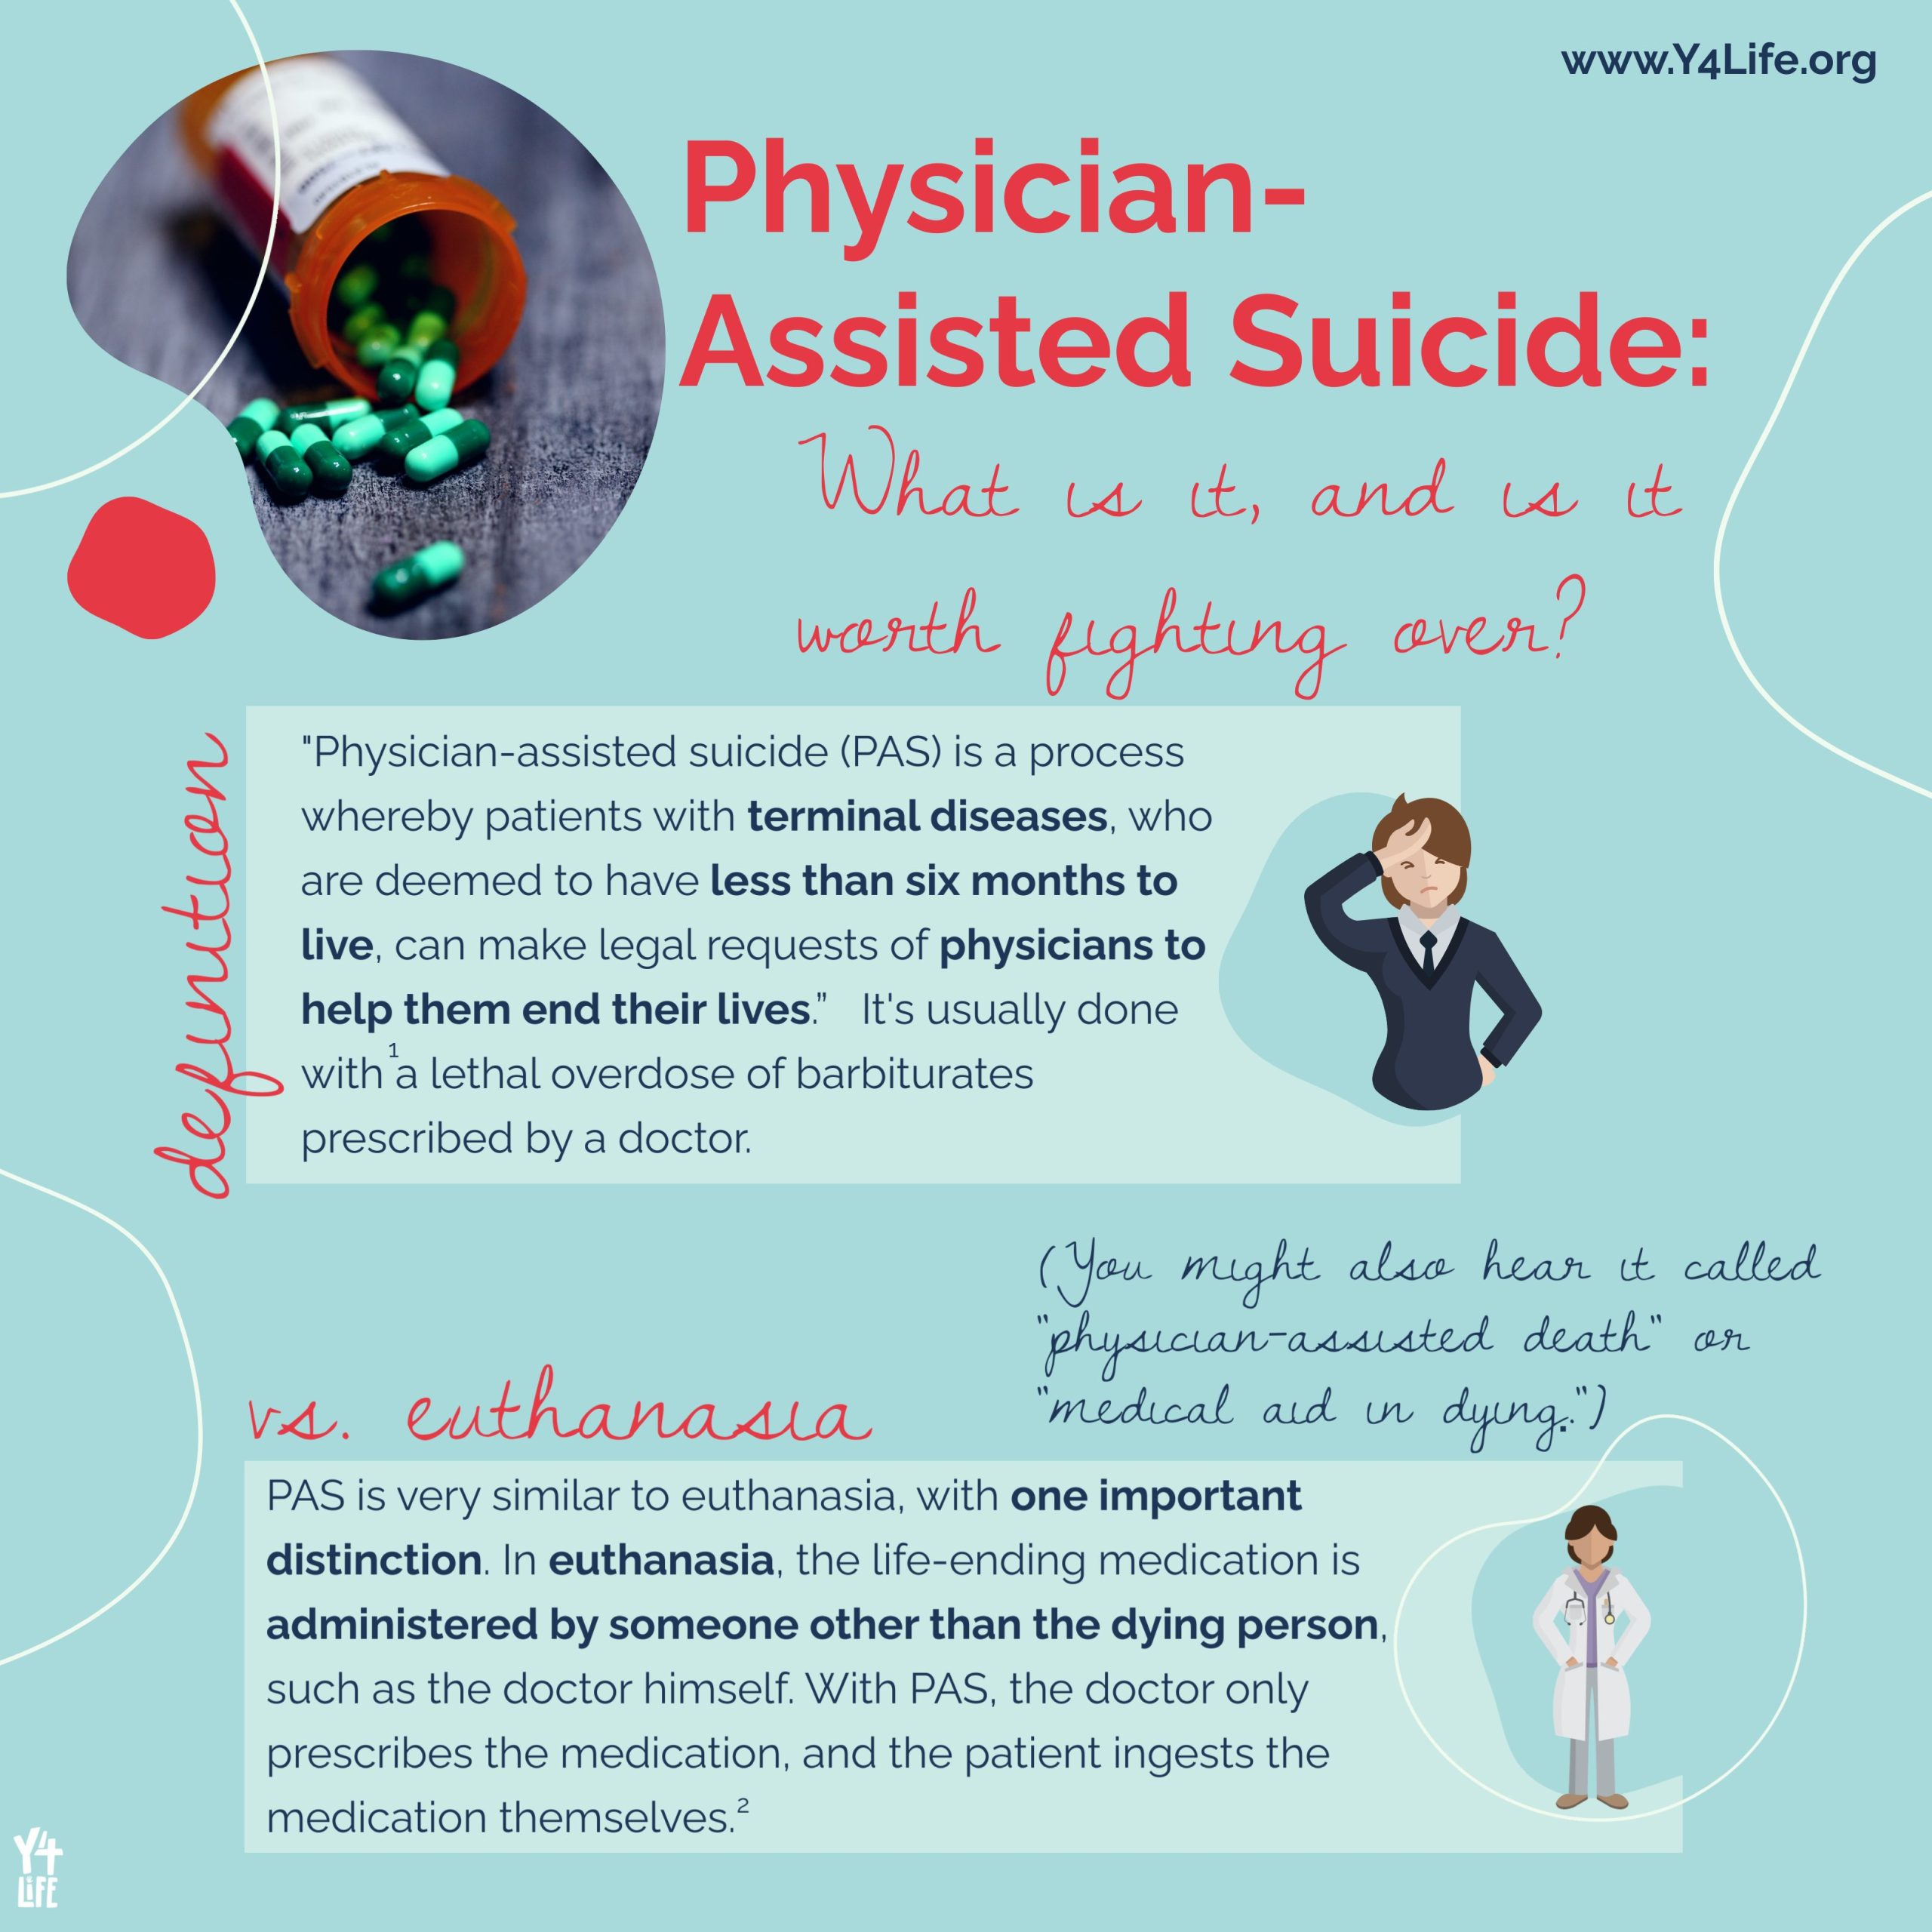 Physician-Assisted Suicide (fold-out brochure)